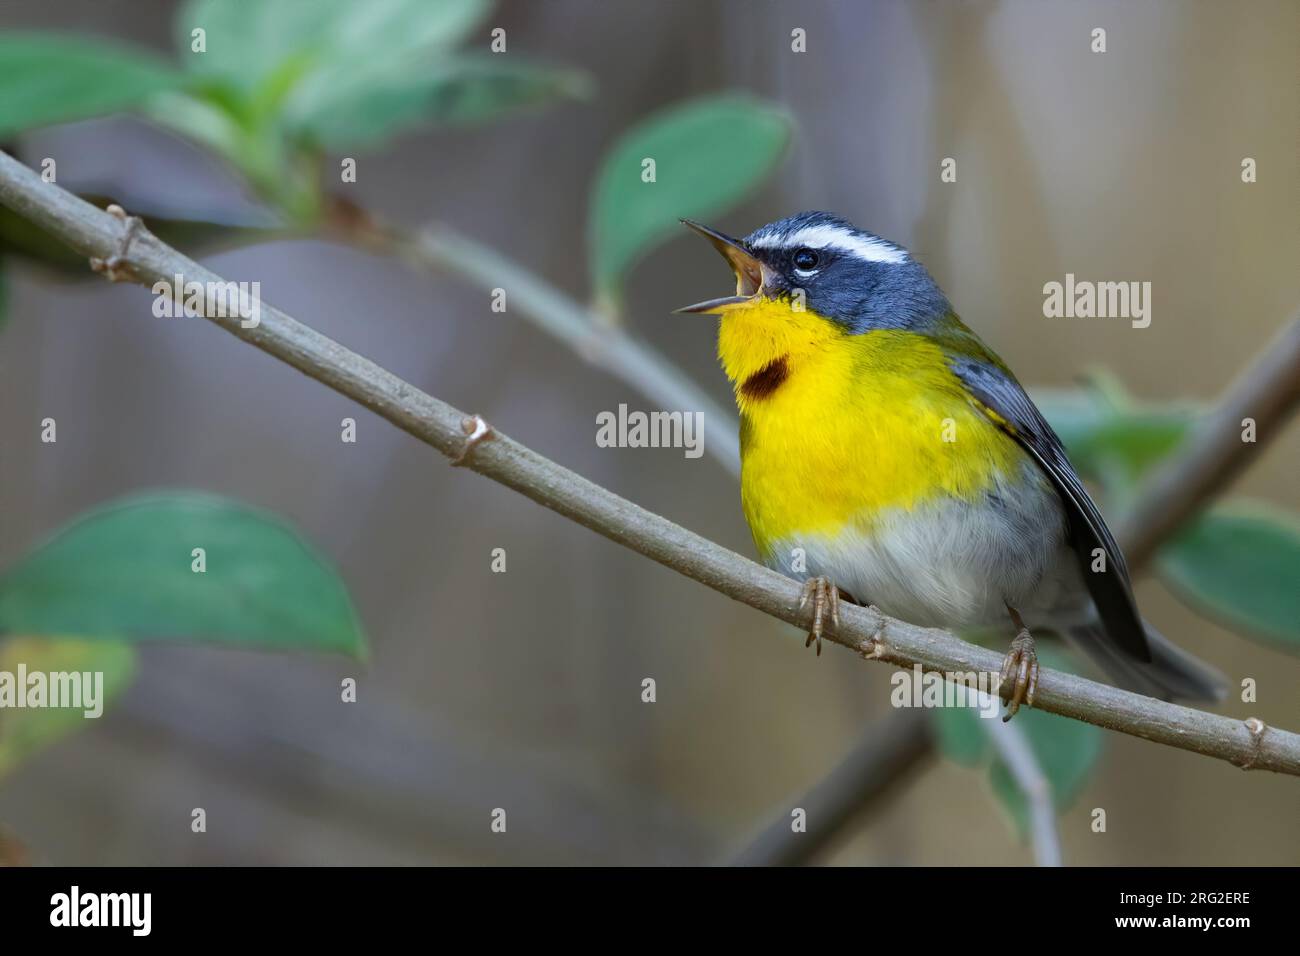 Crescent-chested Warbler (Oreothlypis superciliosa) perched on a branch in a rainforest in Guatemala. Stock Photo